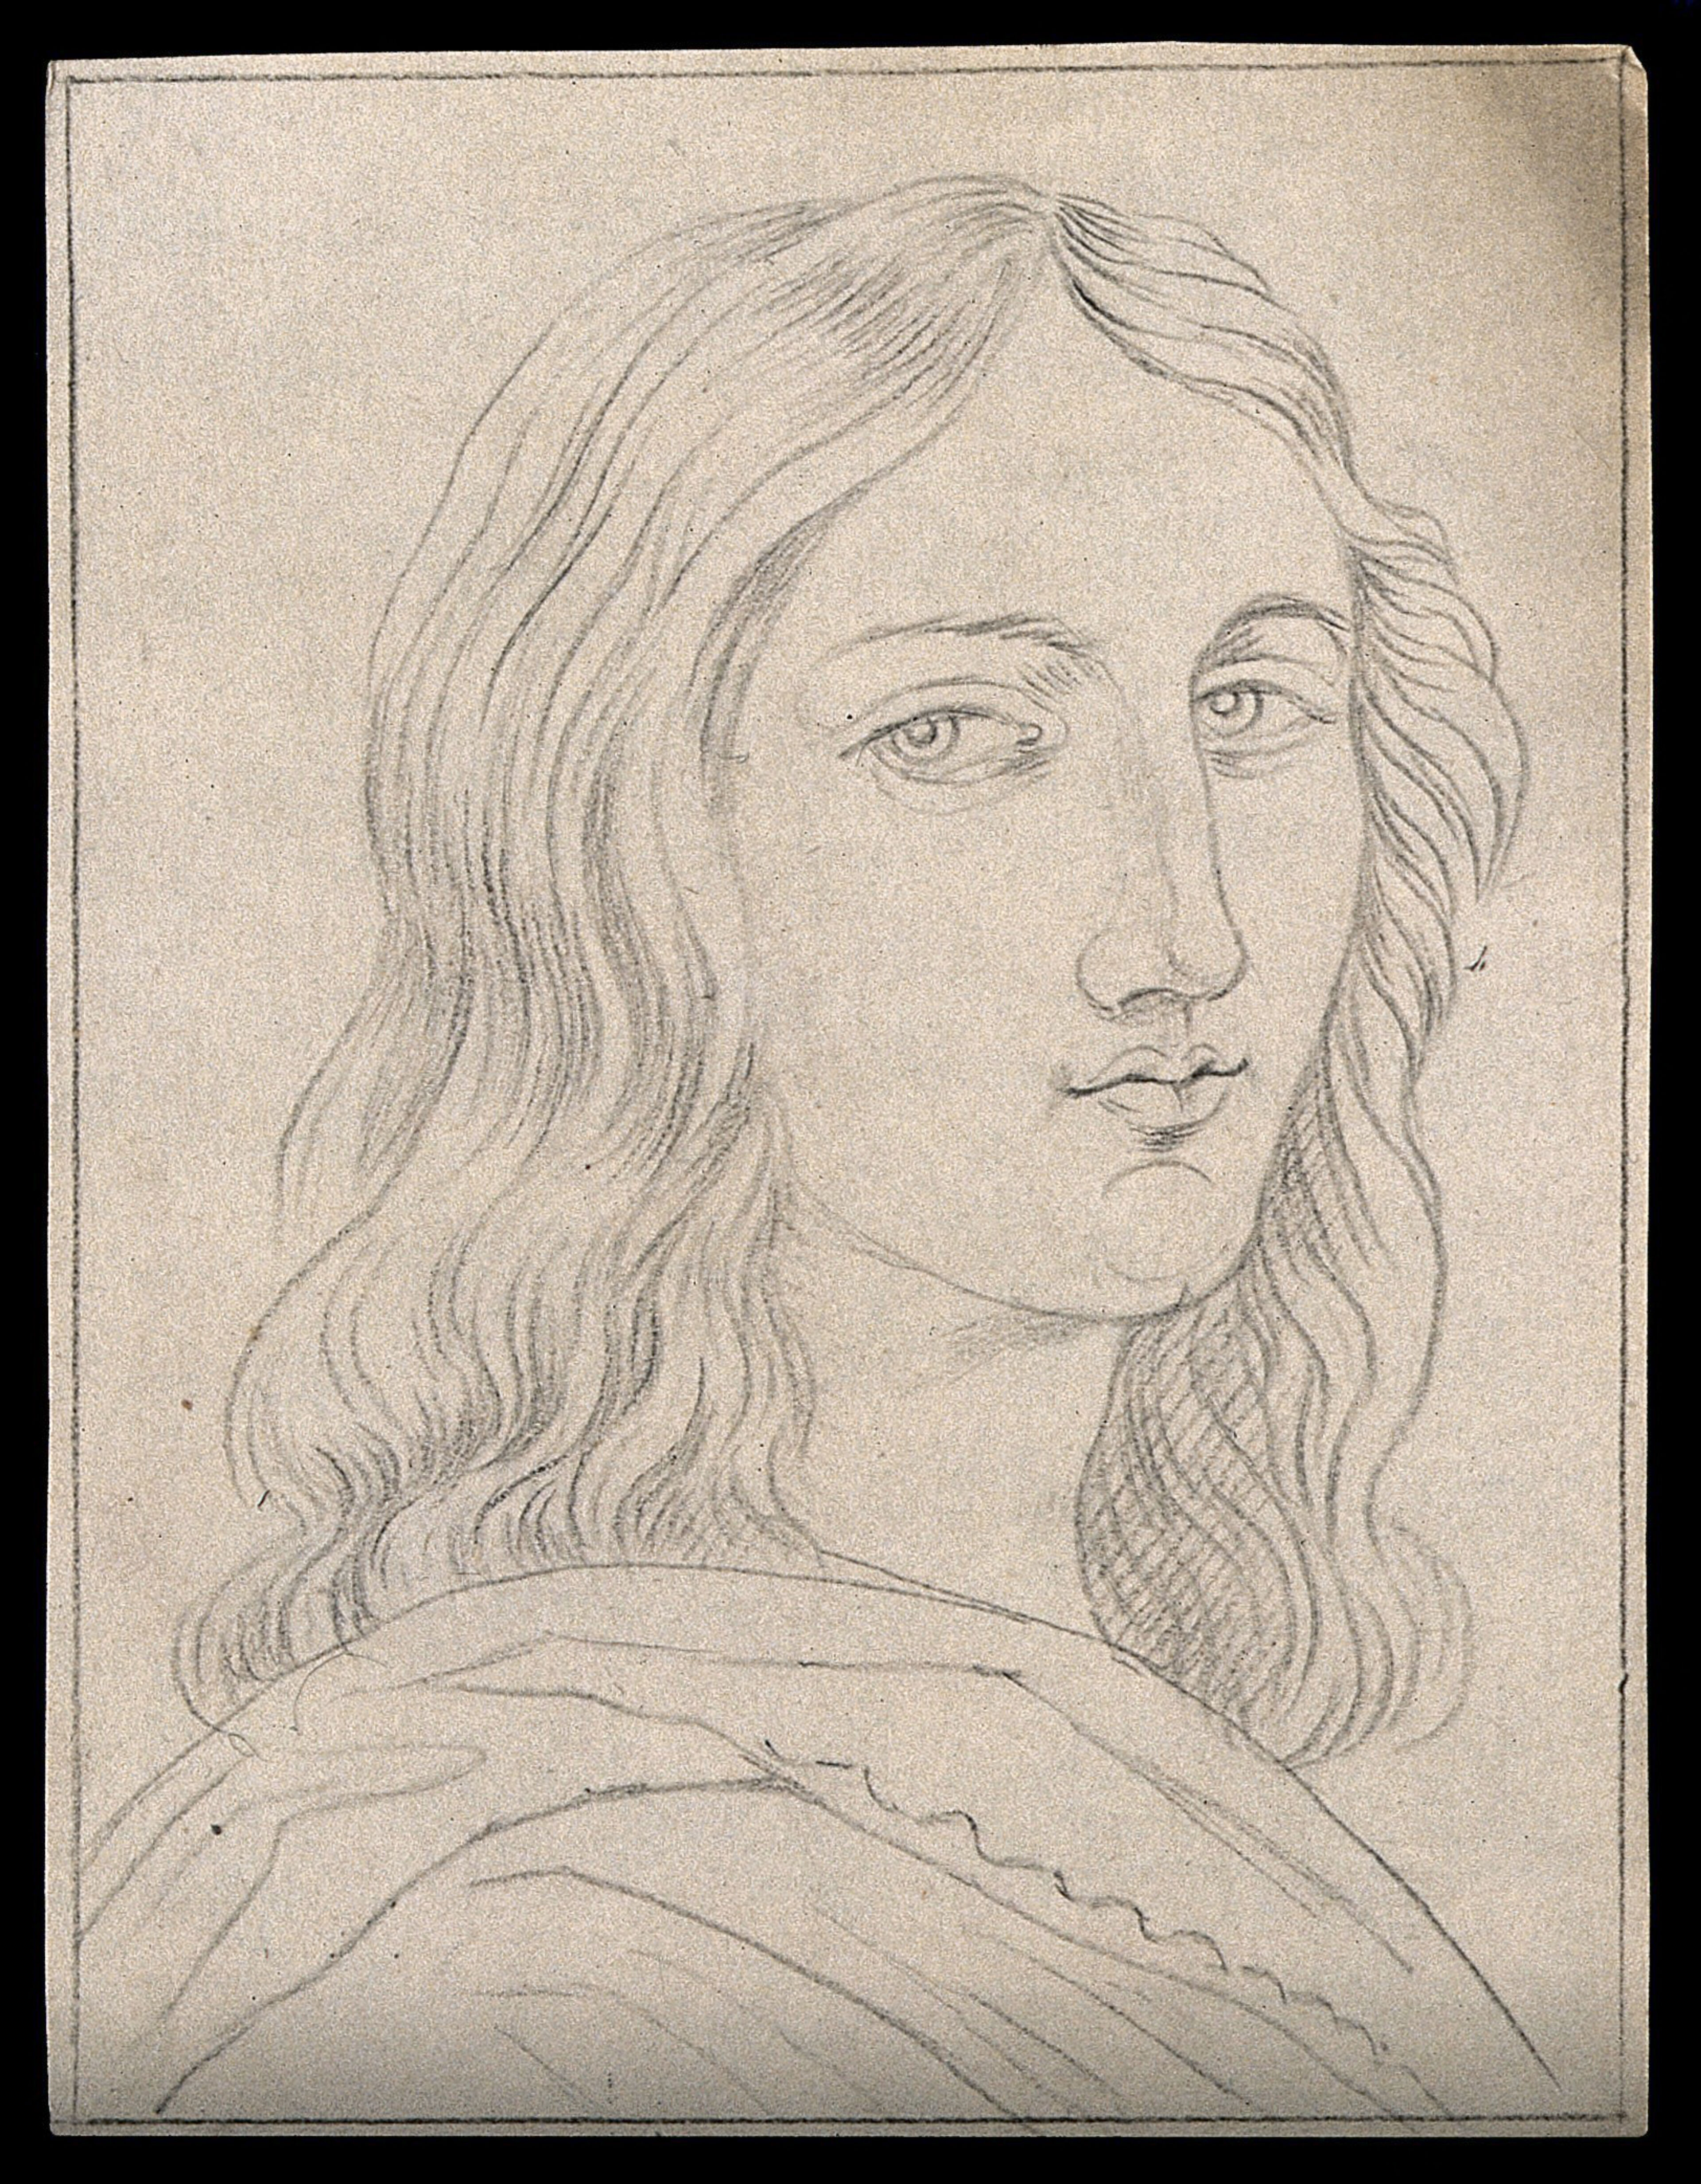 Raphael as a young man: portrait. Drawing, c. 1791, after Raphael.